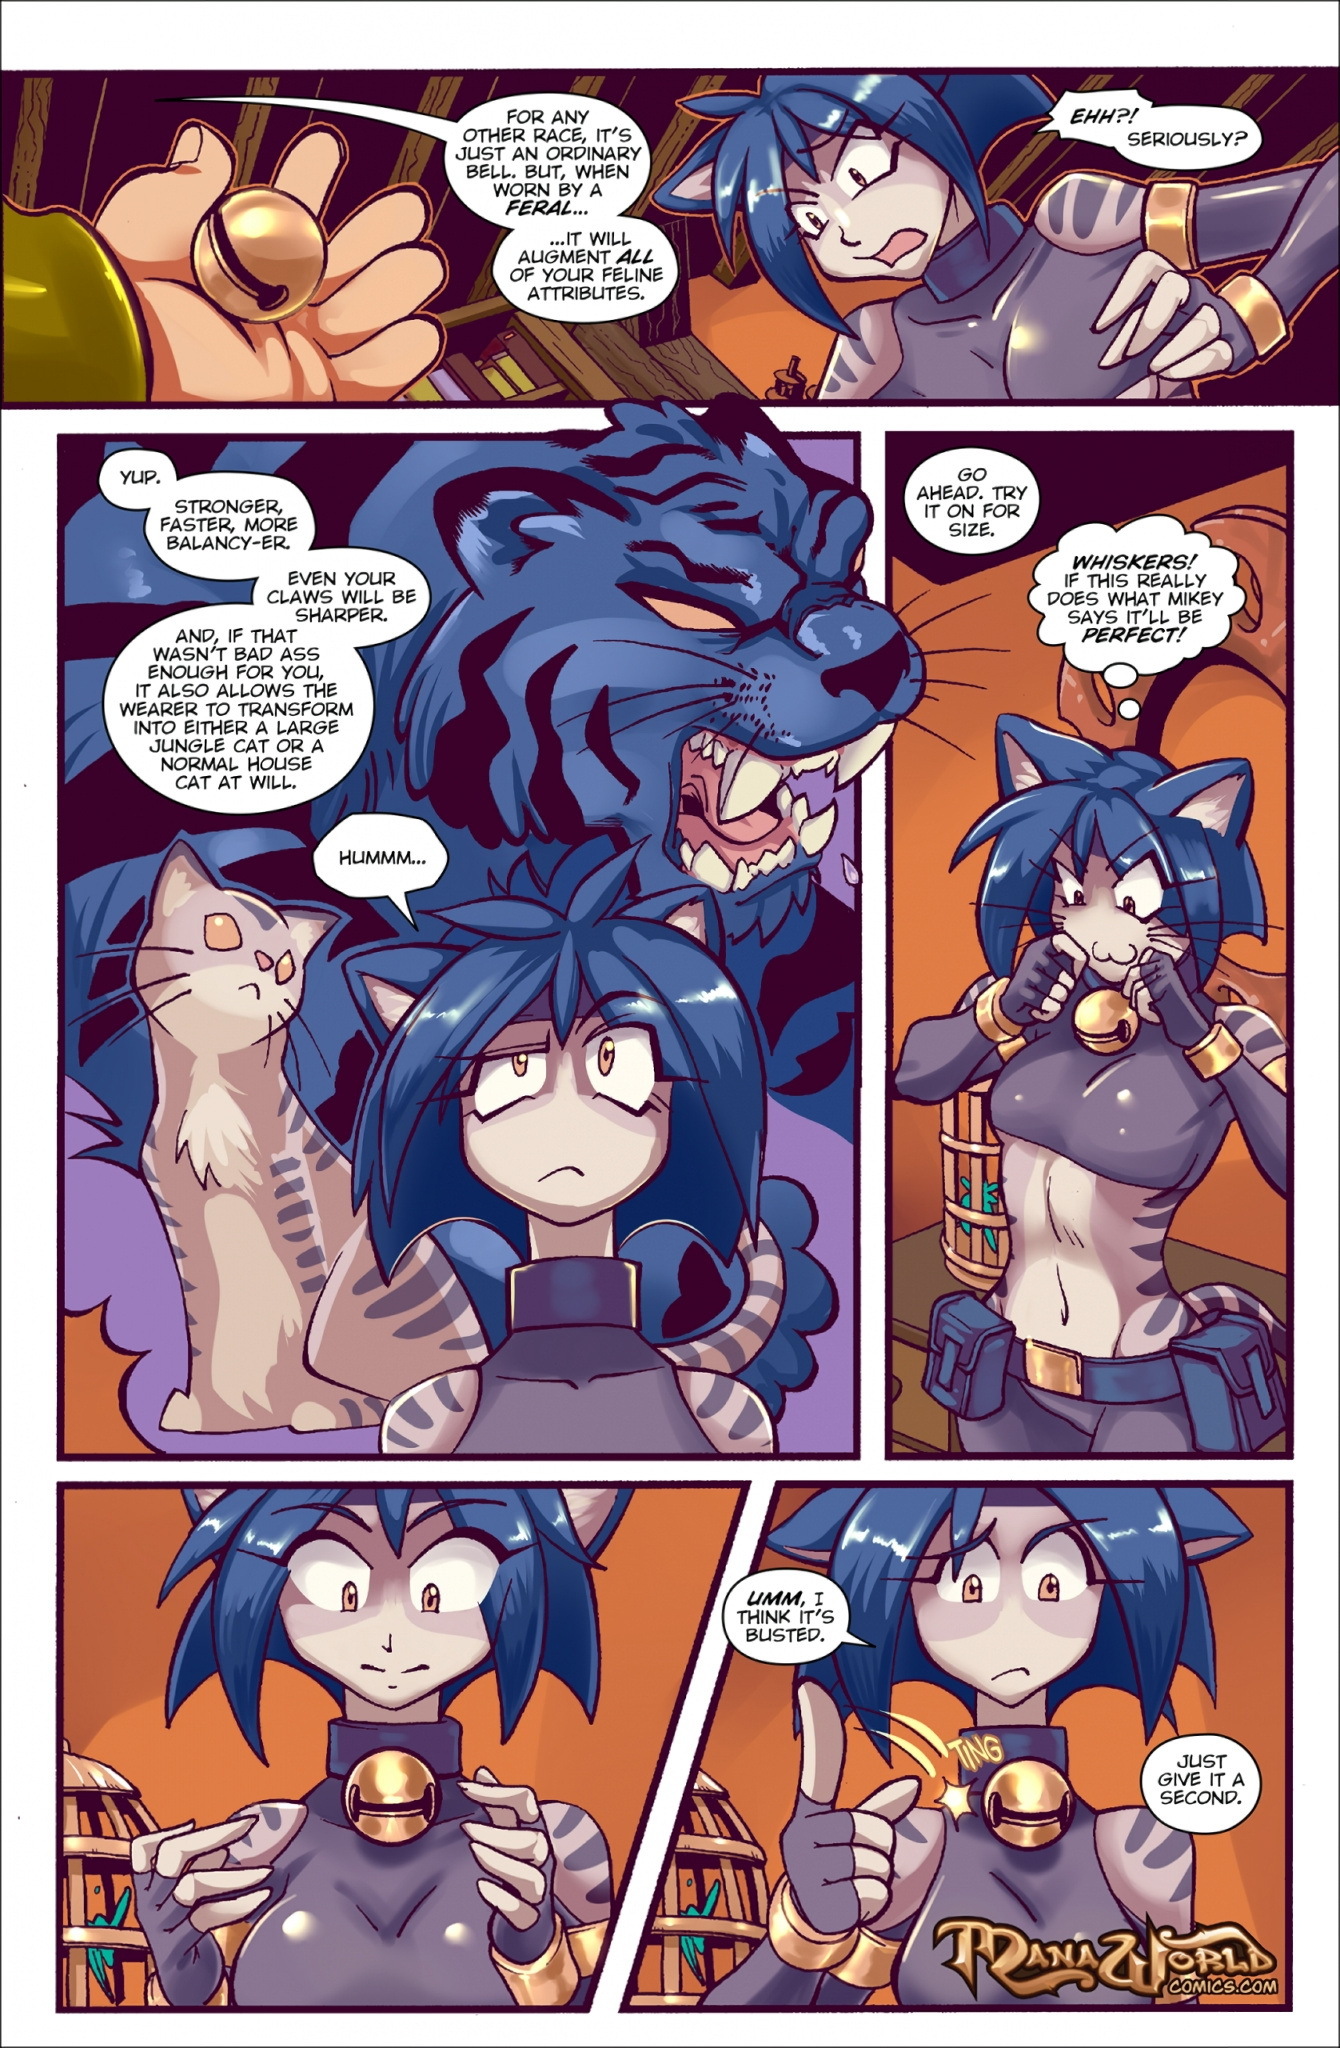 Belling the Cat - Page 3